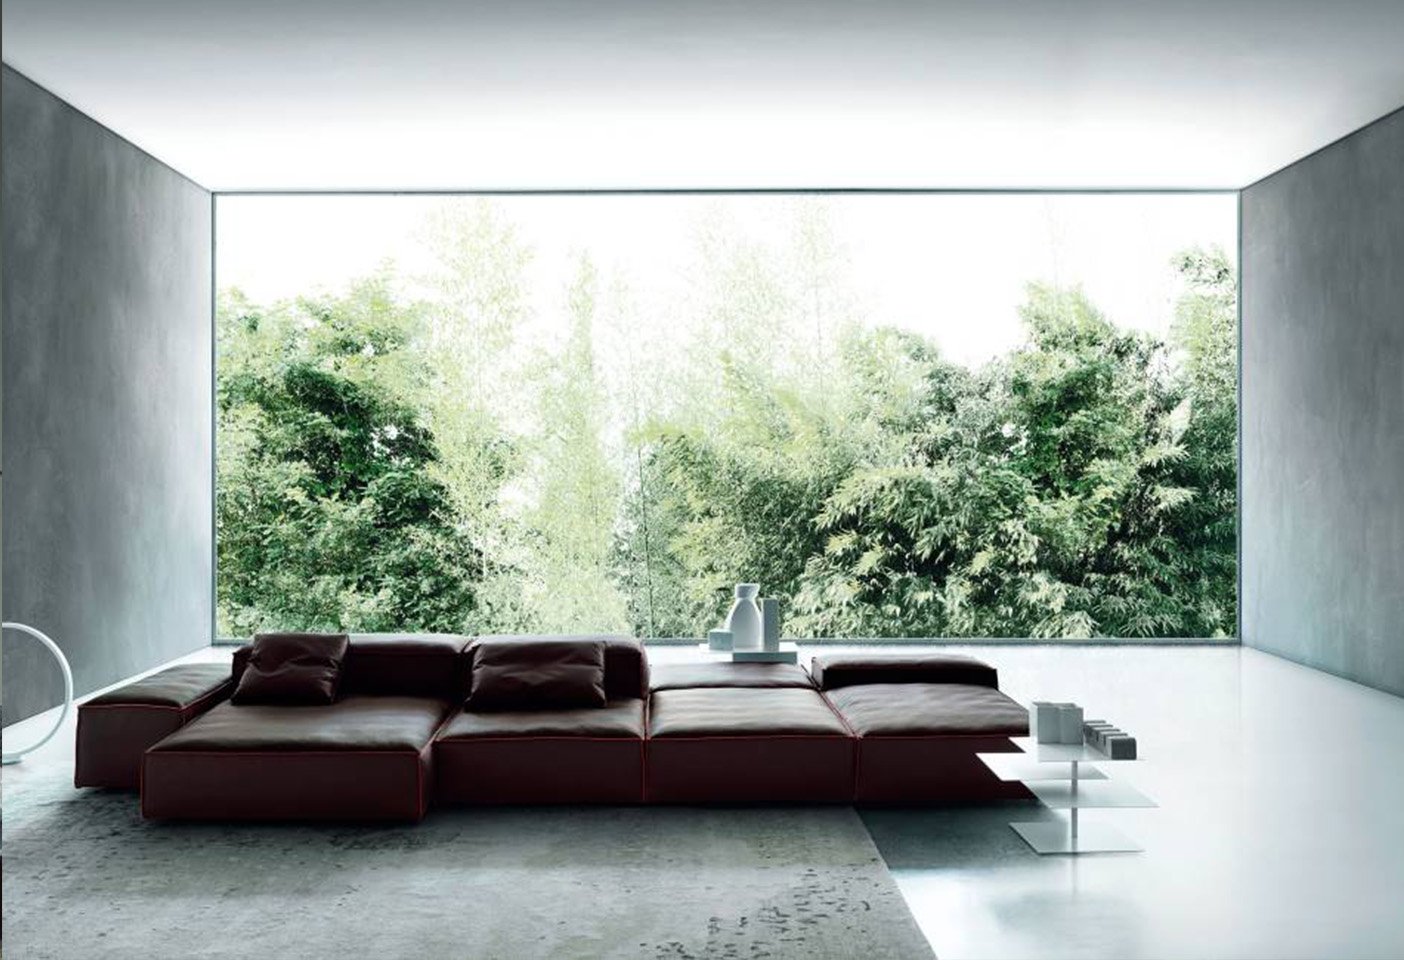 Another composition of the Extra Soft sofa designed by Piero Lissoni for Living Divani. Photo c/o Living Divani.